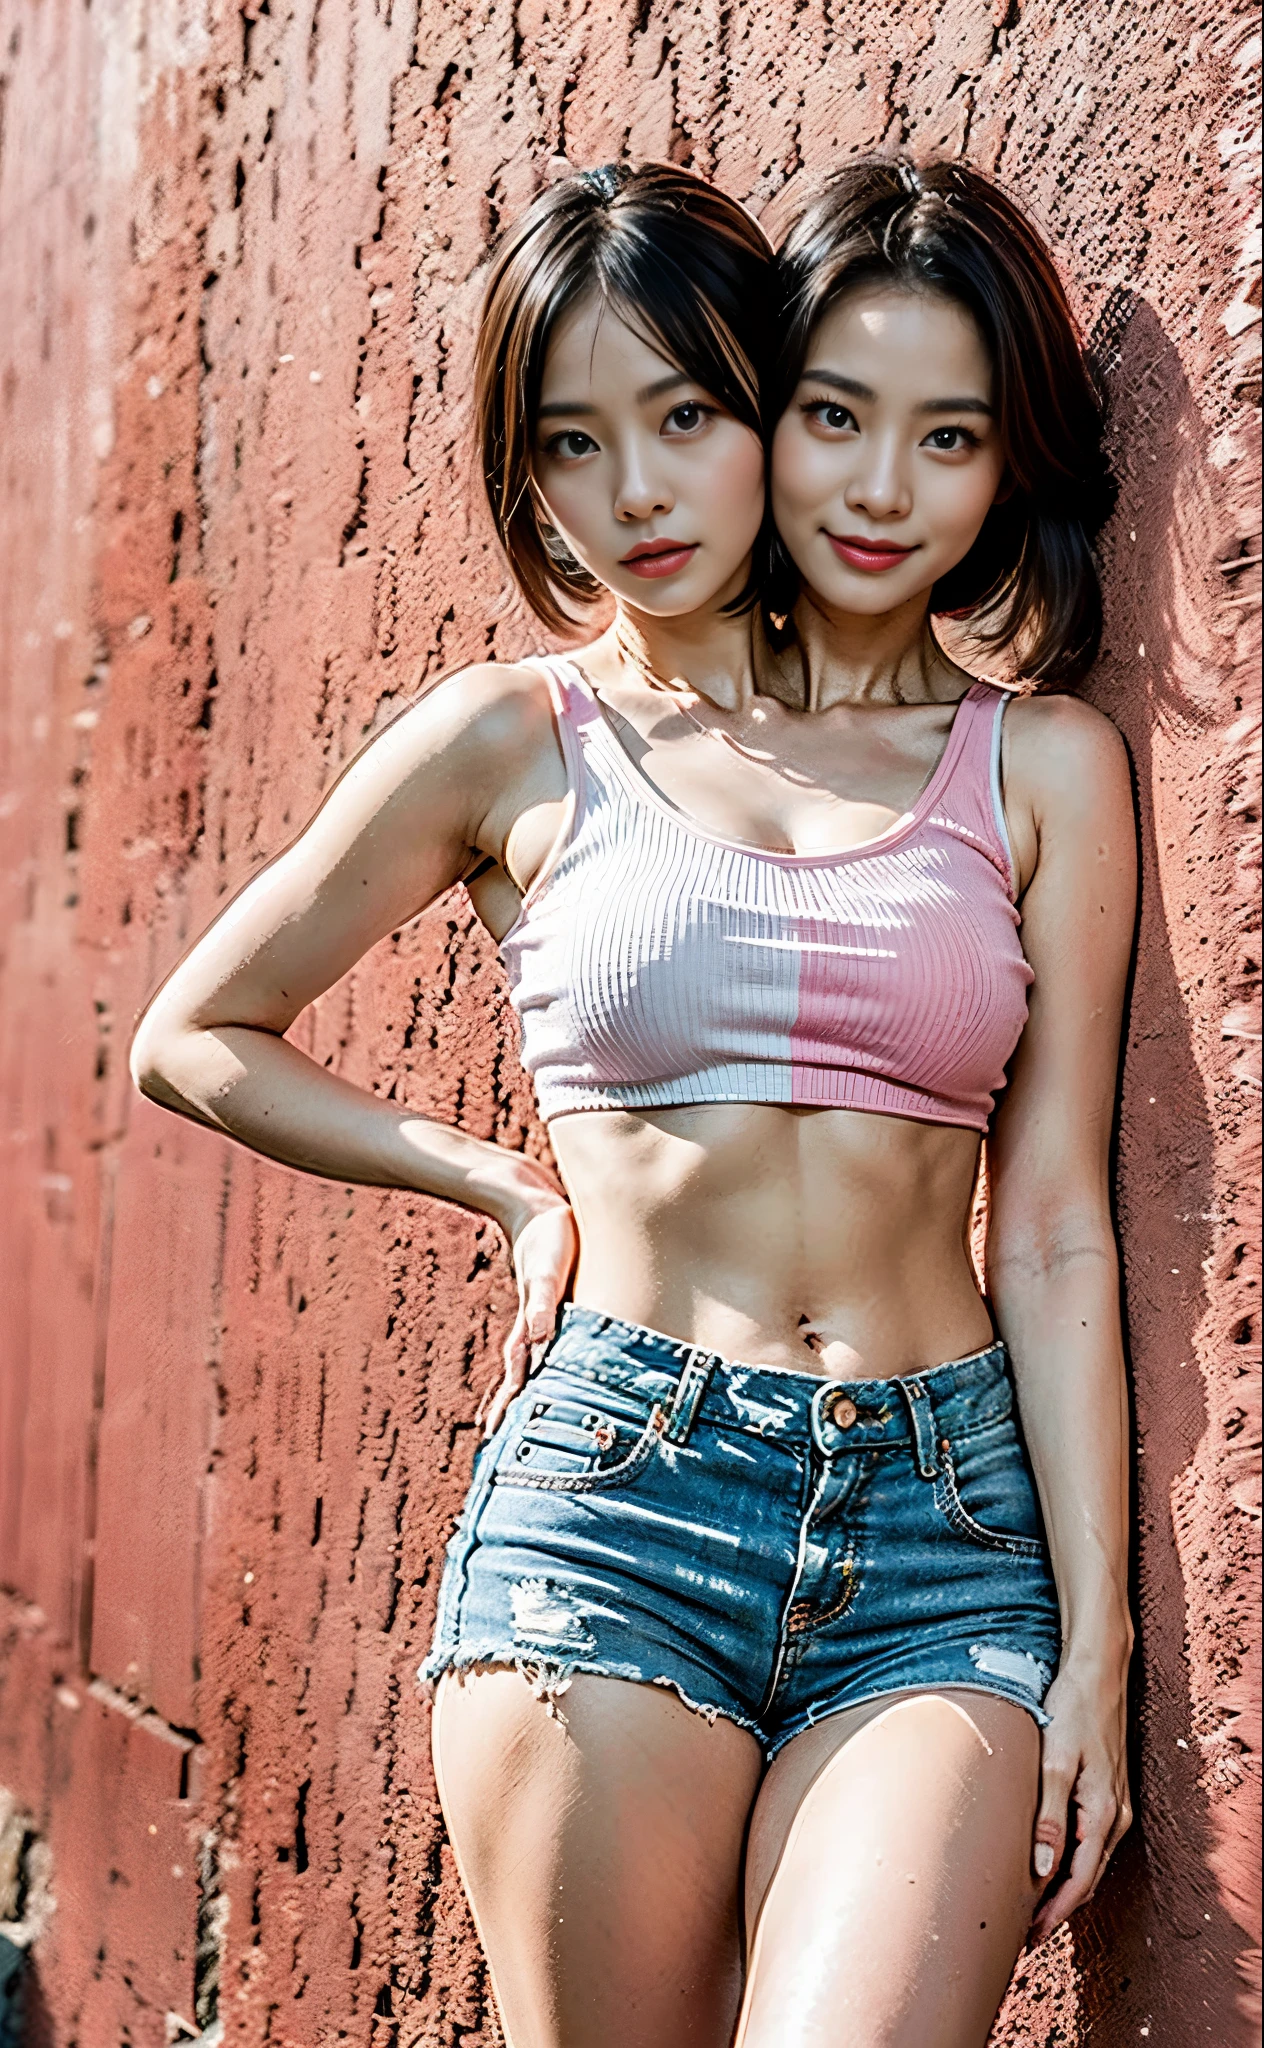 best resolution, 2 heads, woman with 2 heads, korean, brow hair, different expressions,differentfaces, different hairstyles, hand on hip, blue eye contacts, white and red bkino, black and blue shorts, pink wall background